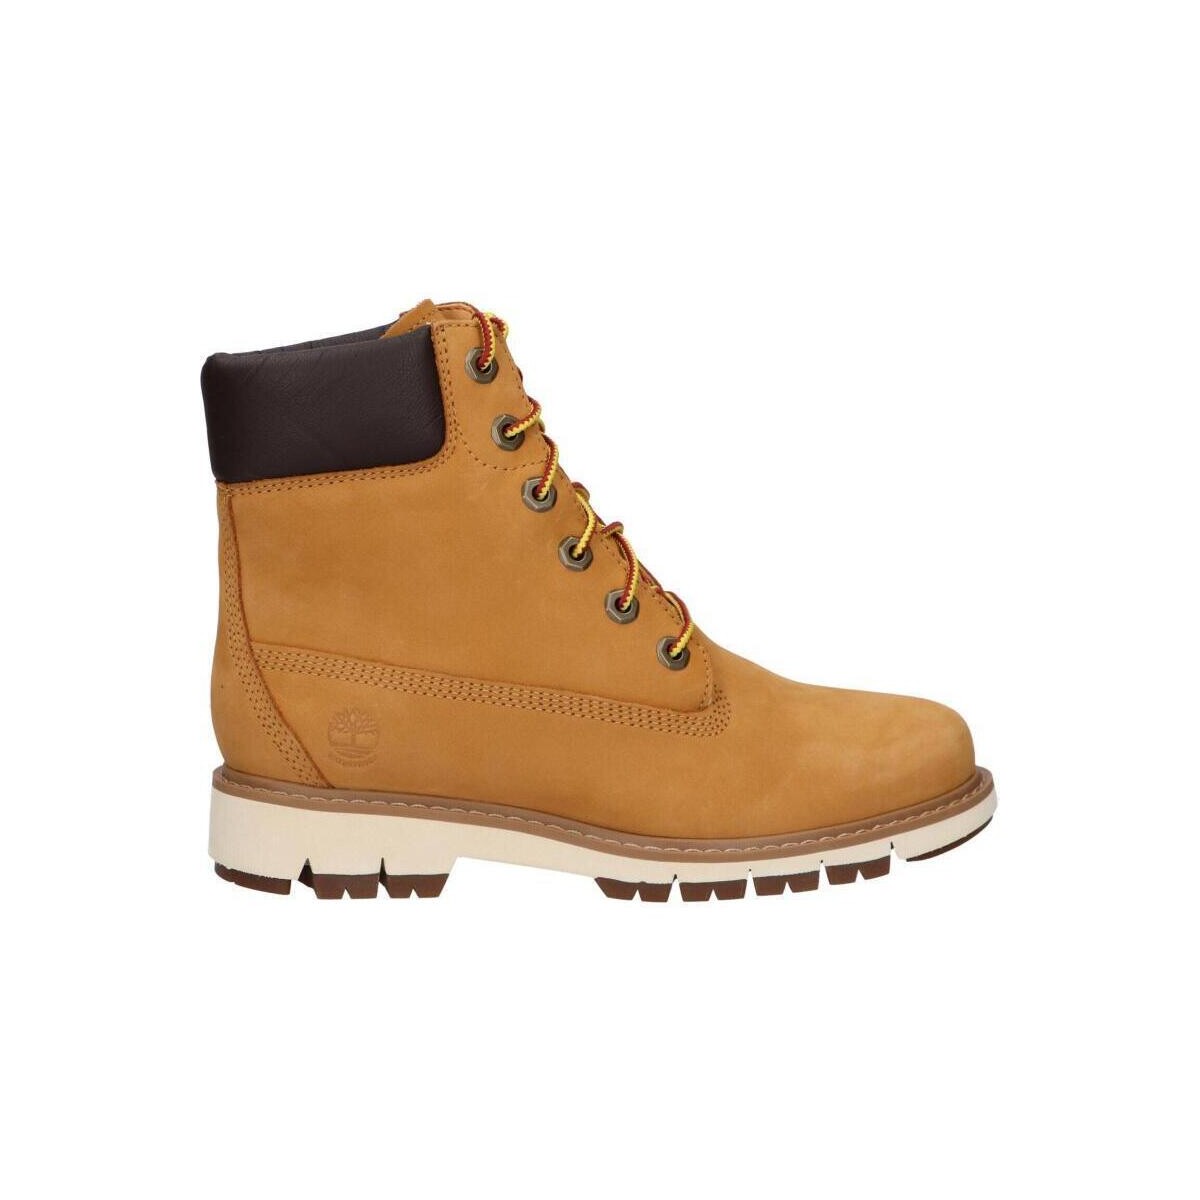 Chaussures Femme Bottes Timberland A1T6U LUCIA WAY A1T6U LUCIA WAY 